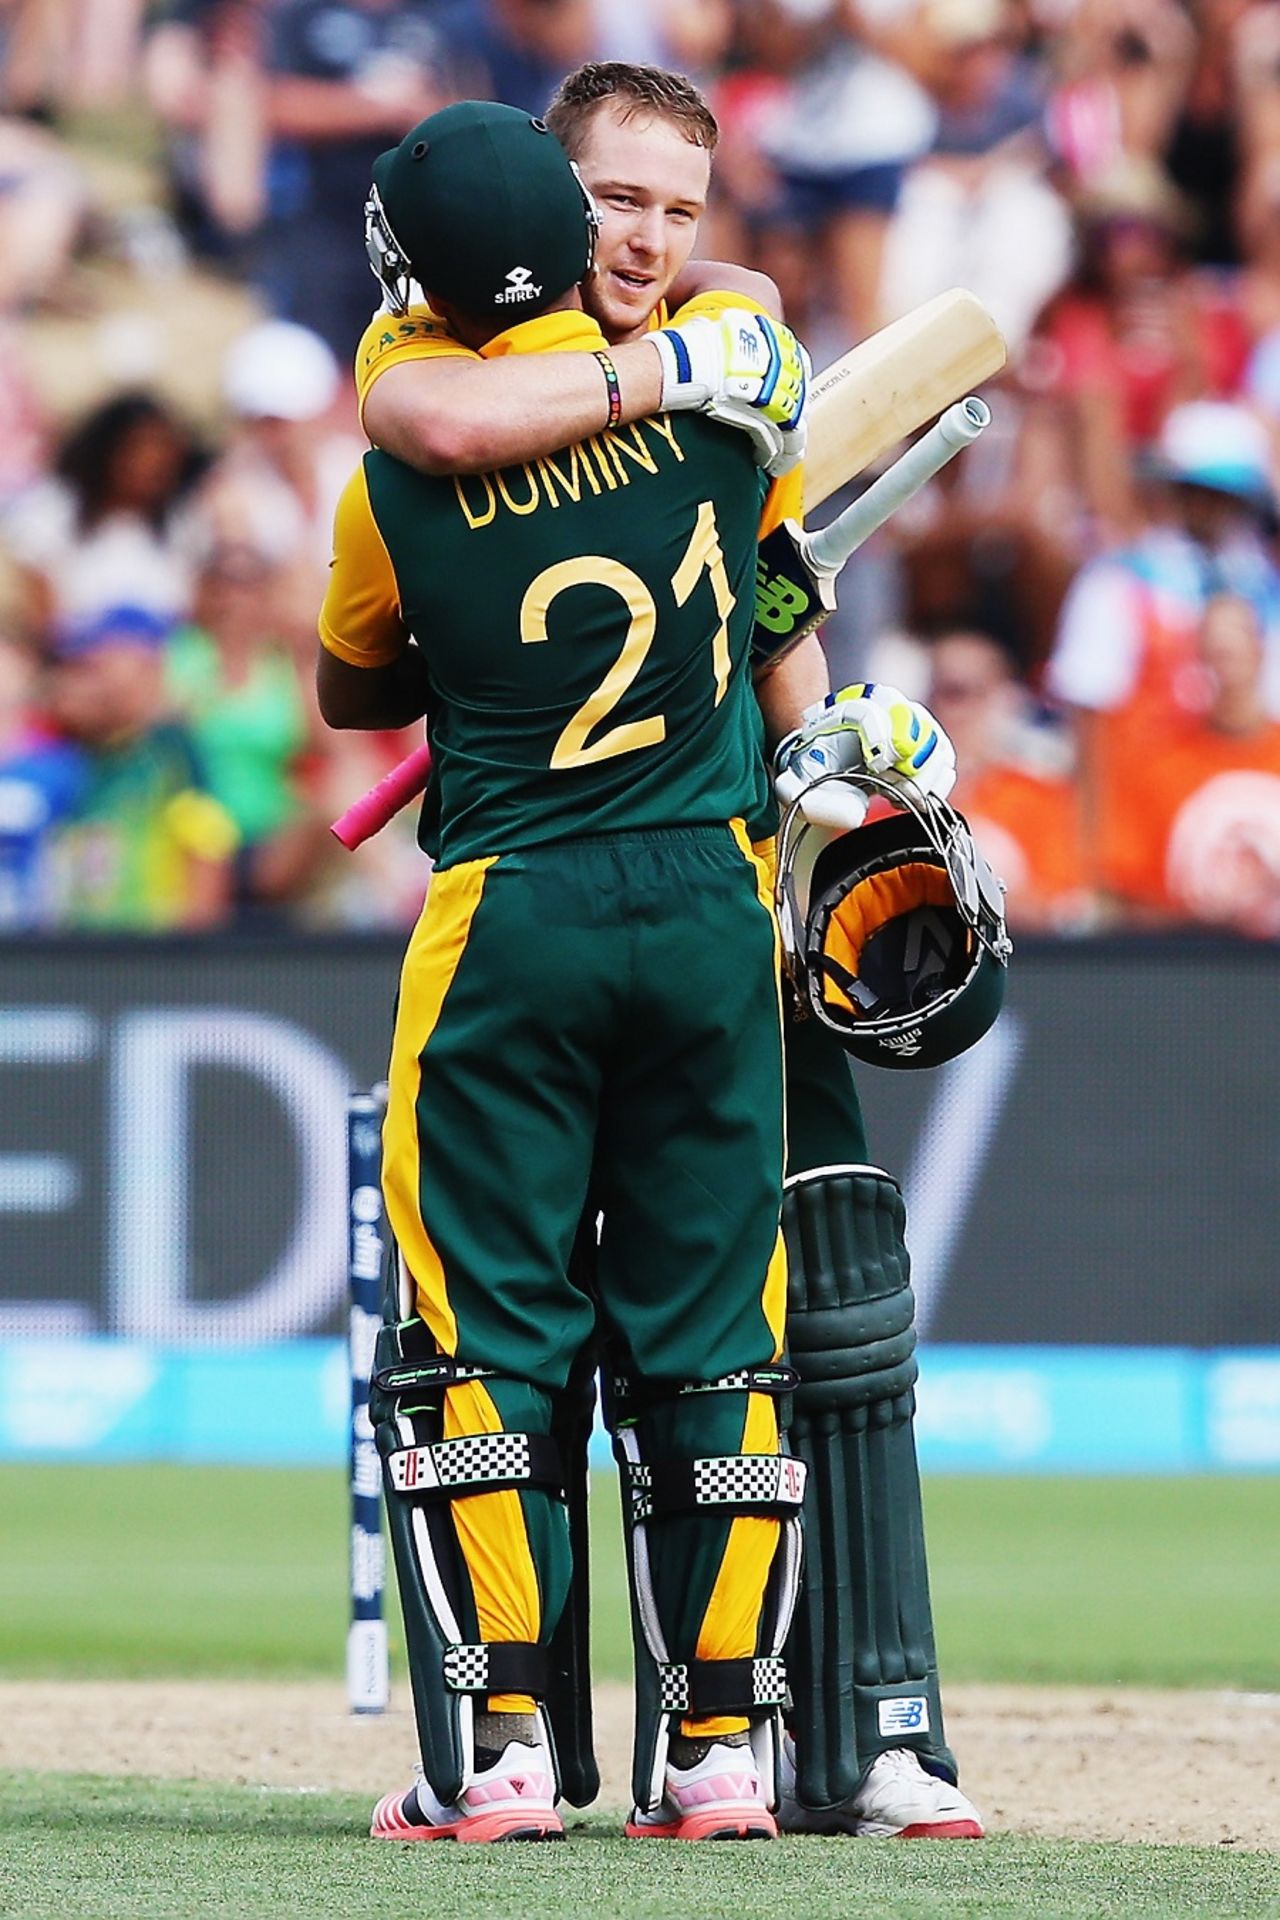 David Miller and JP Duminy scored centuries to power South Africa to 339,  South Africa v Zimbabwe, World Cup 2015, Group B, Hamilton, February 15, 2015